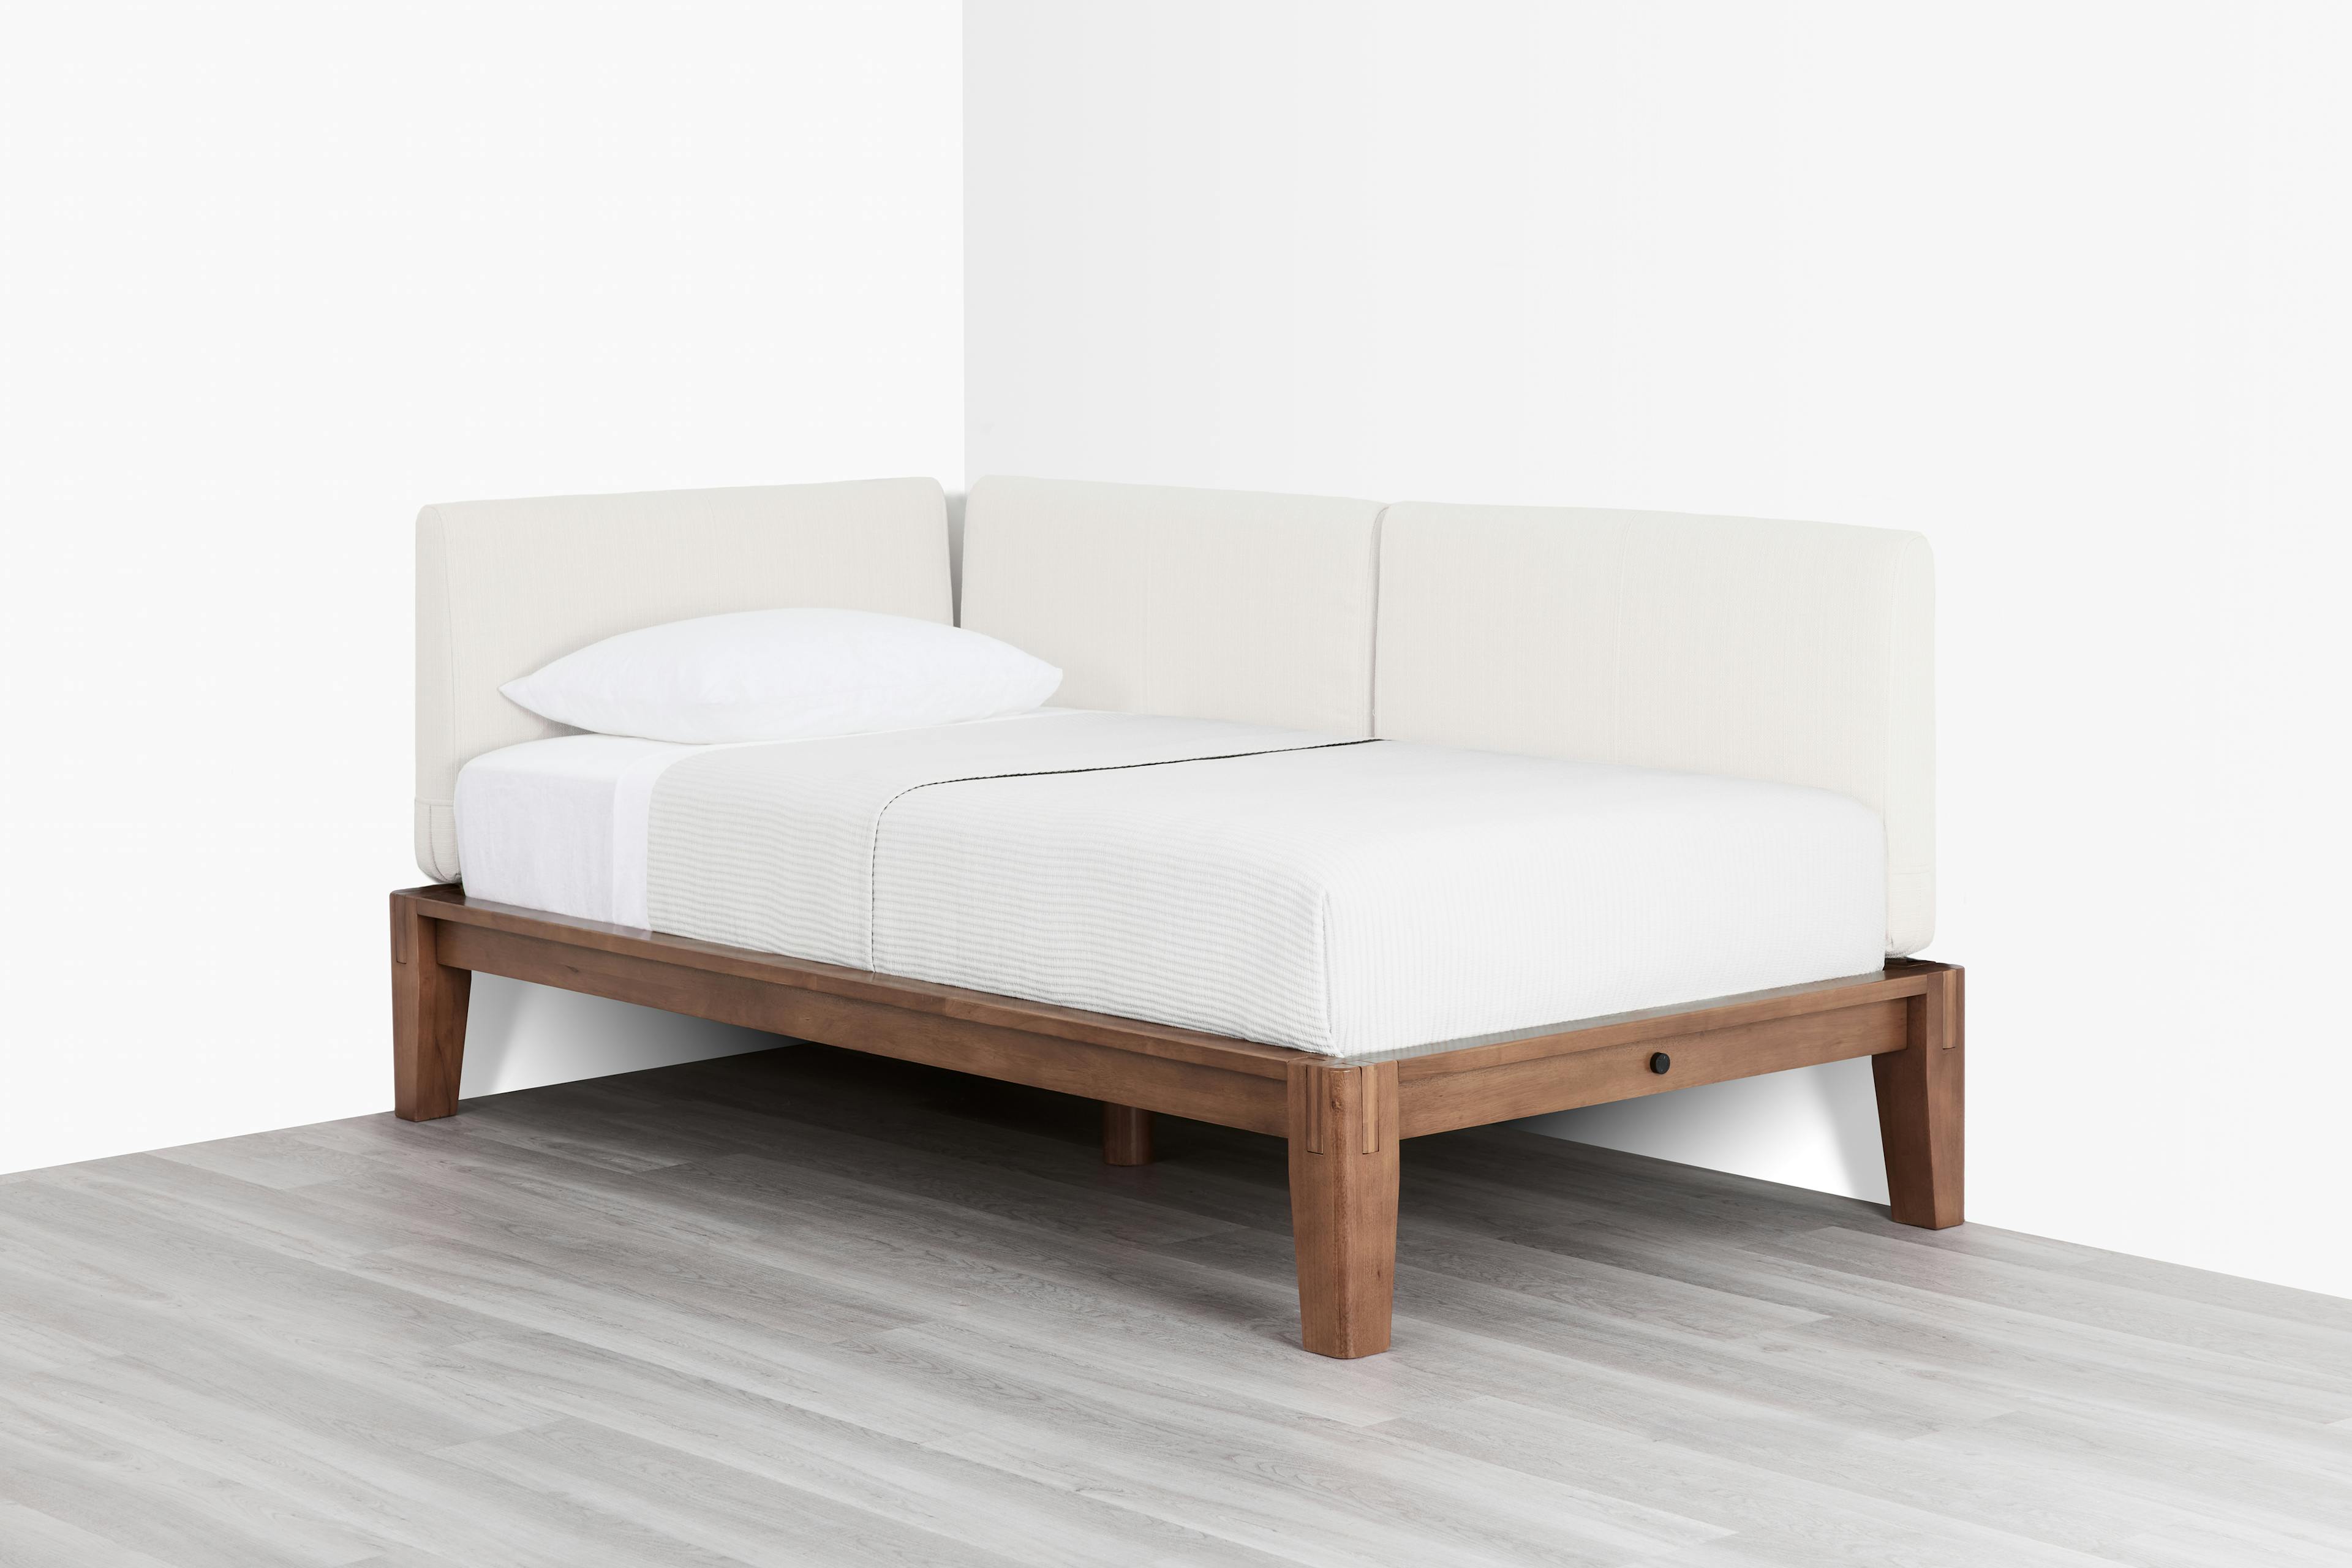 PDP Image: The Daybed (Walnut / Light Linen) - 3:2 - Front